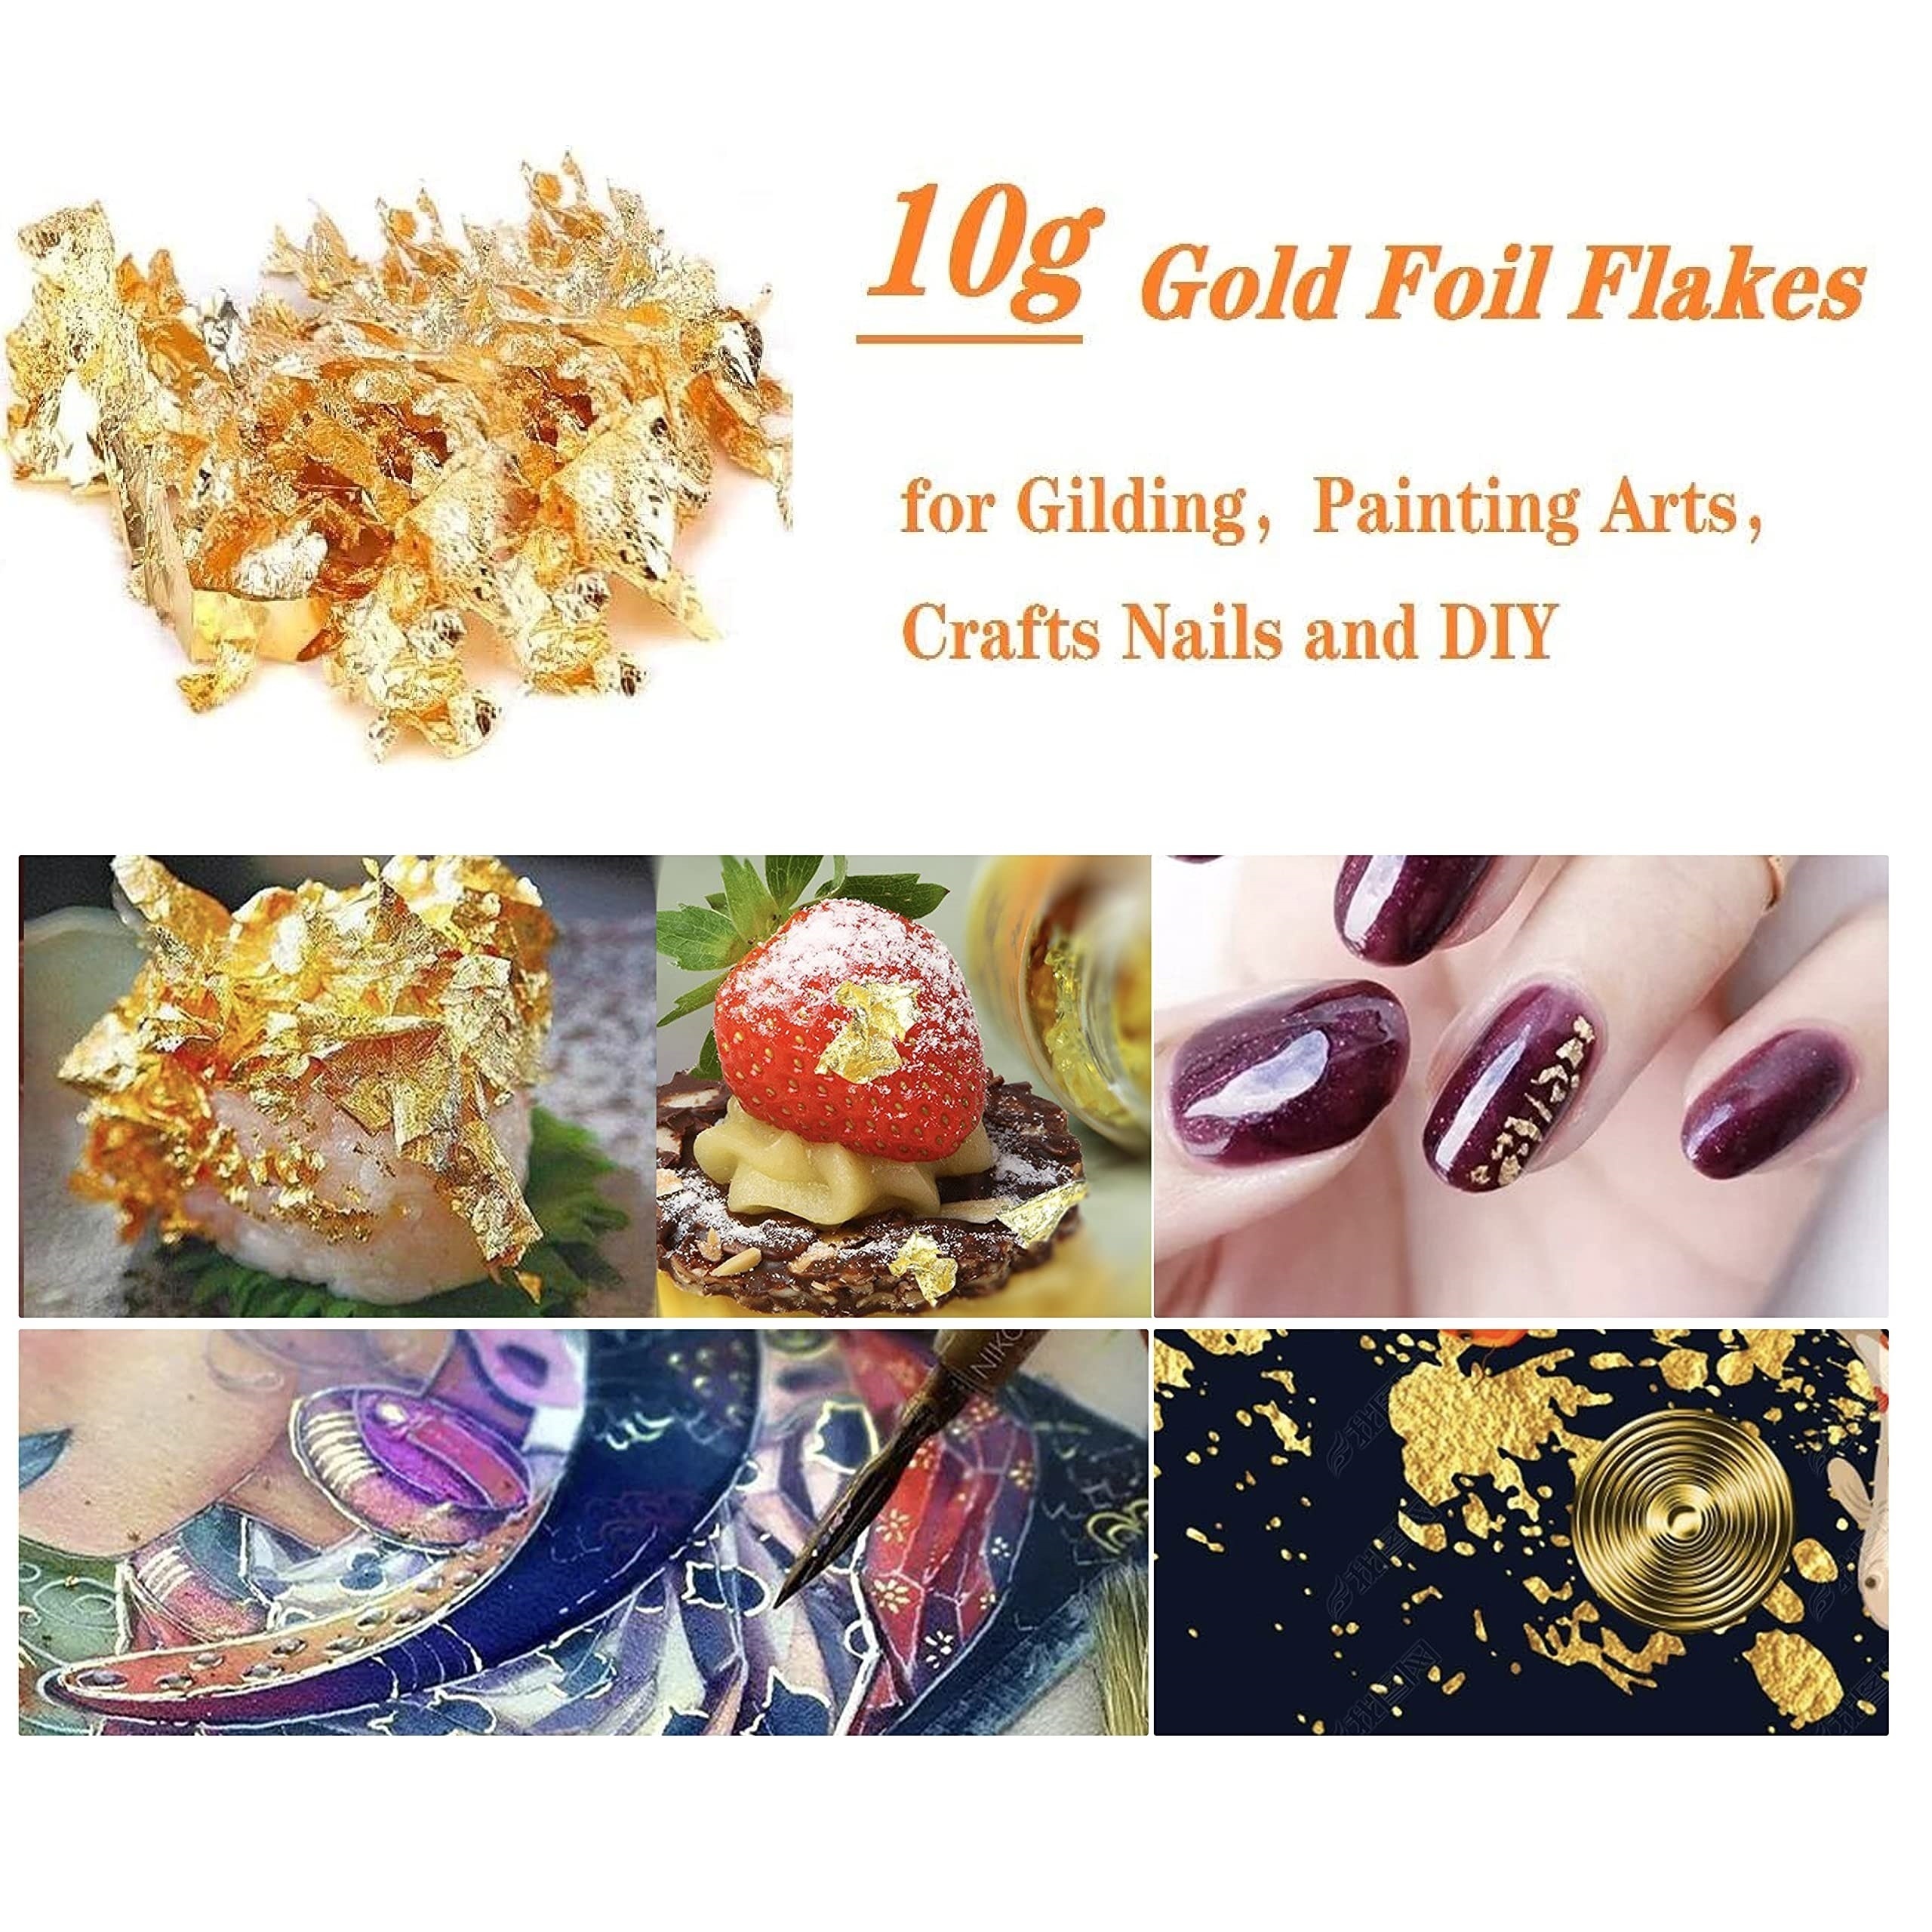 Amdohai 1 Box Golden Foil Flakes Gilding Flakes Made of for Metallic Foil  Flakes for Nails DIY Painting Crafts Slime and Resin Jewelry Making Gold  Silver Copper Colors 